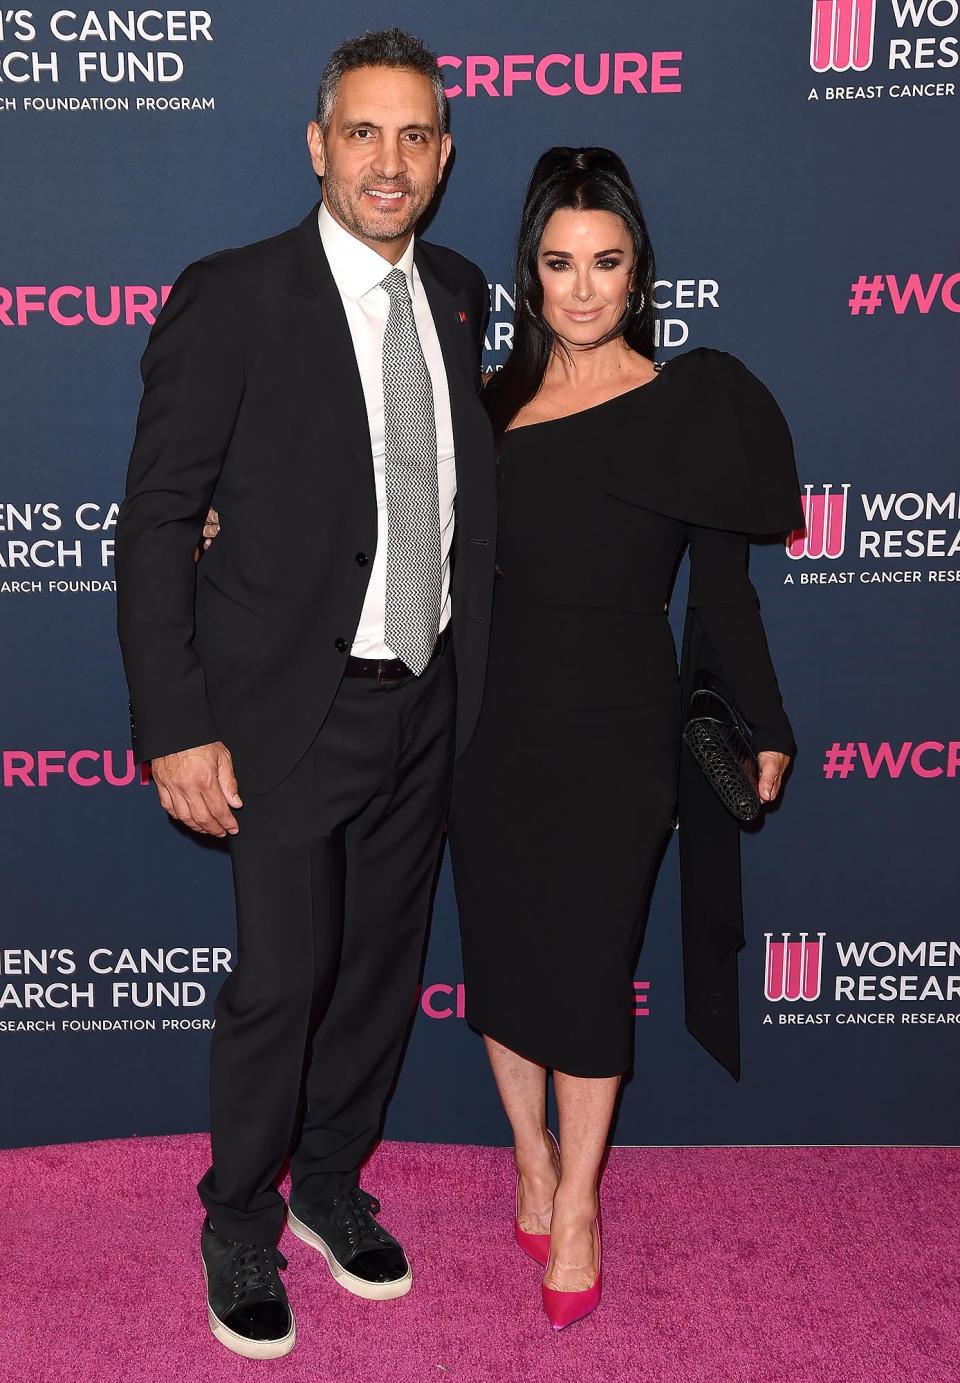 Kyle Richards Says Mauricio Umansky Moved Out When She Was Away, Coming Home Was 'Strange'